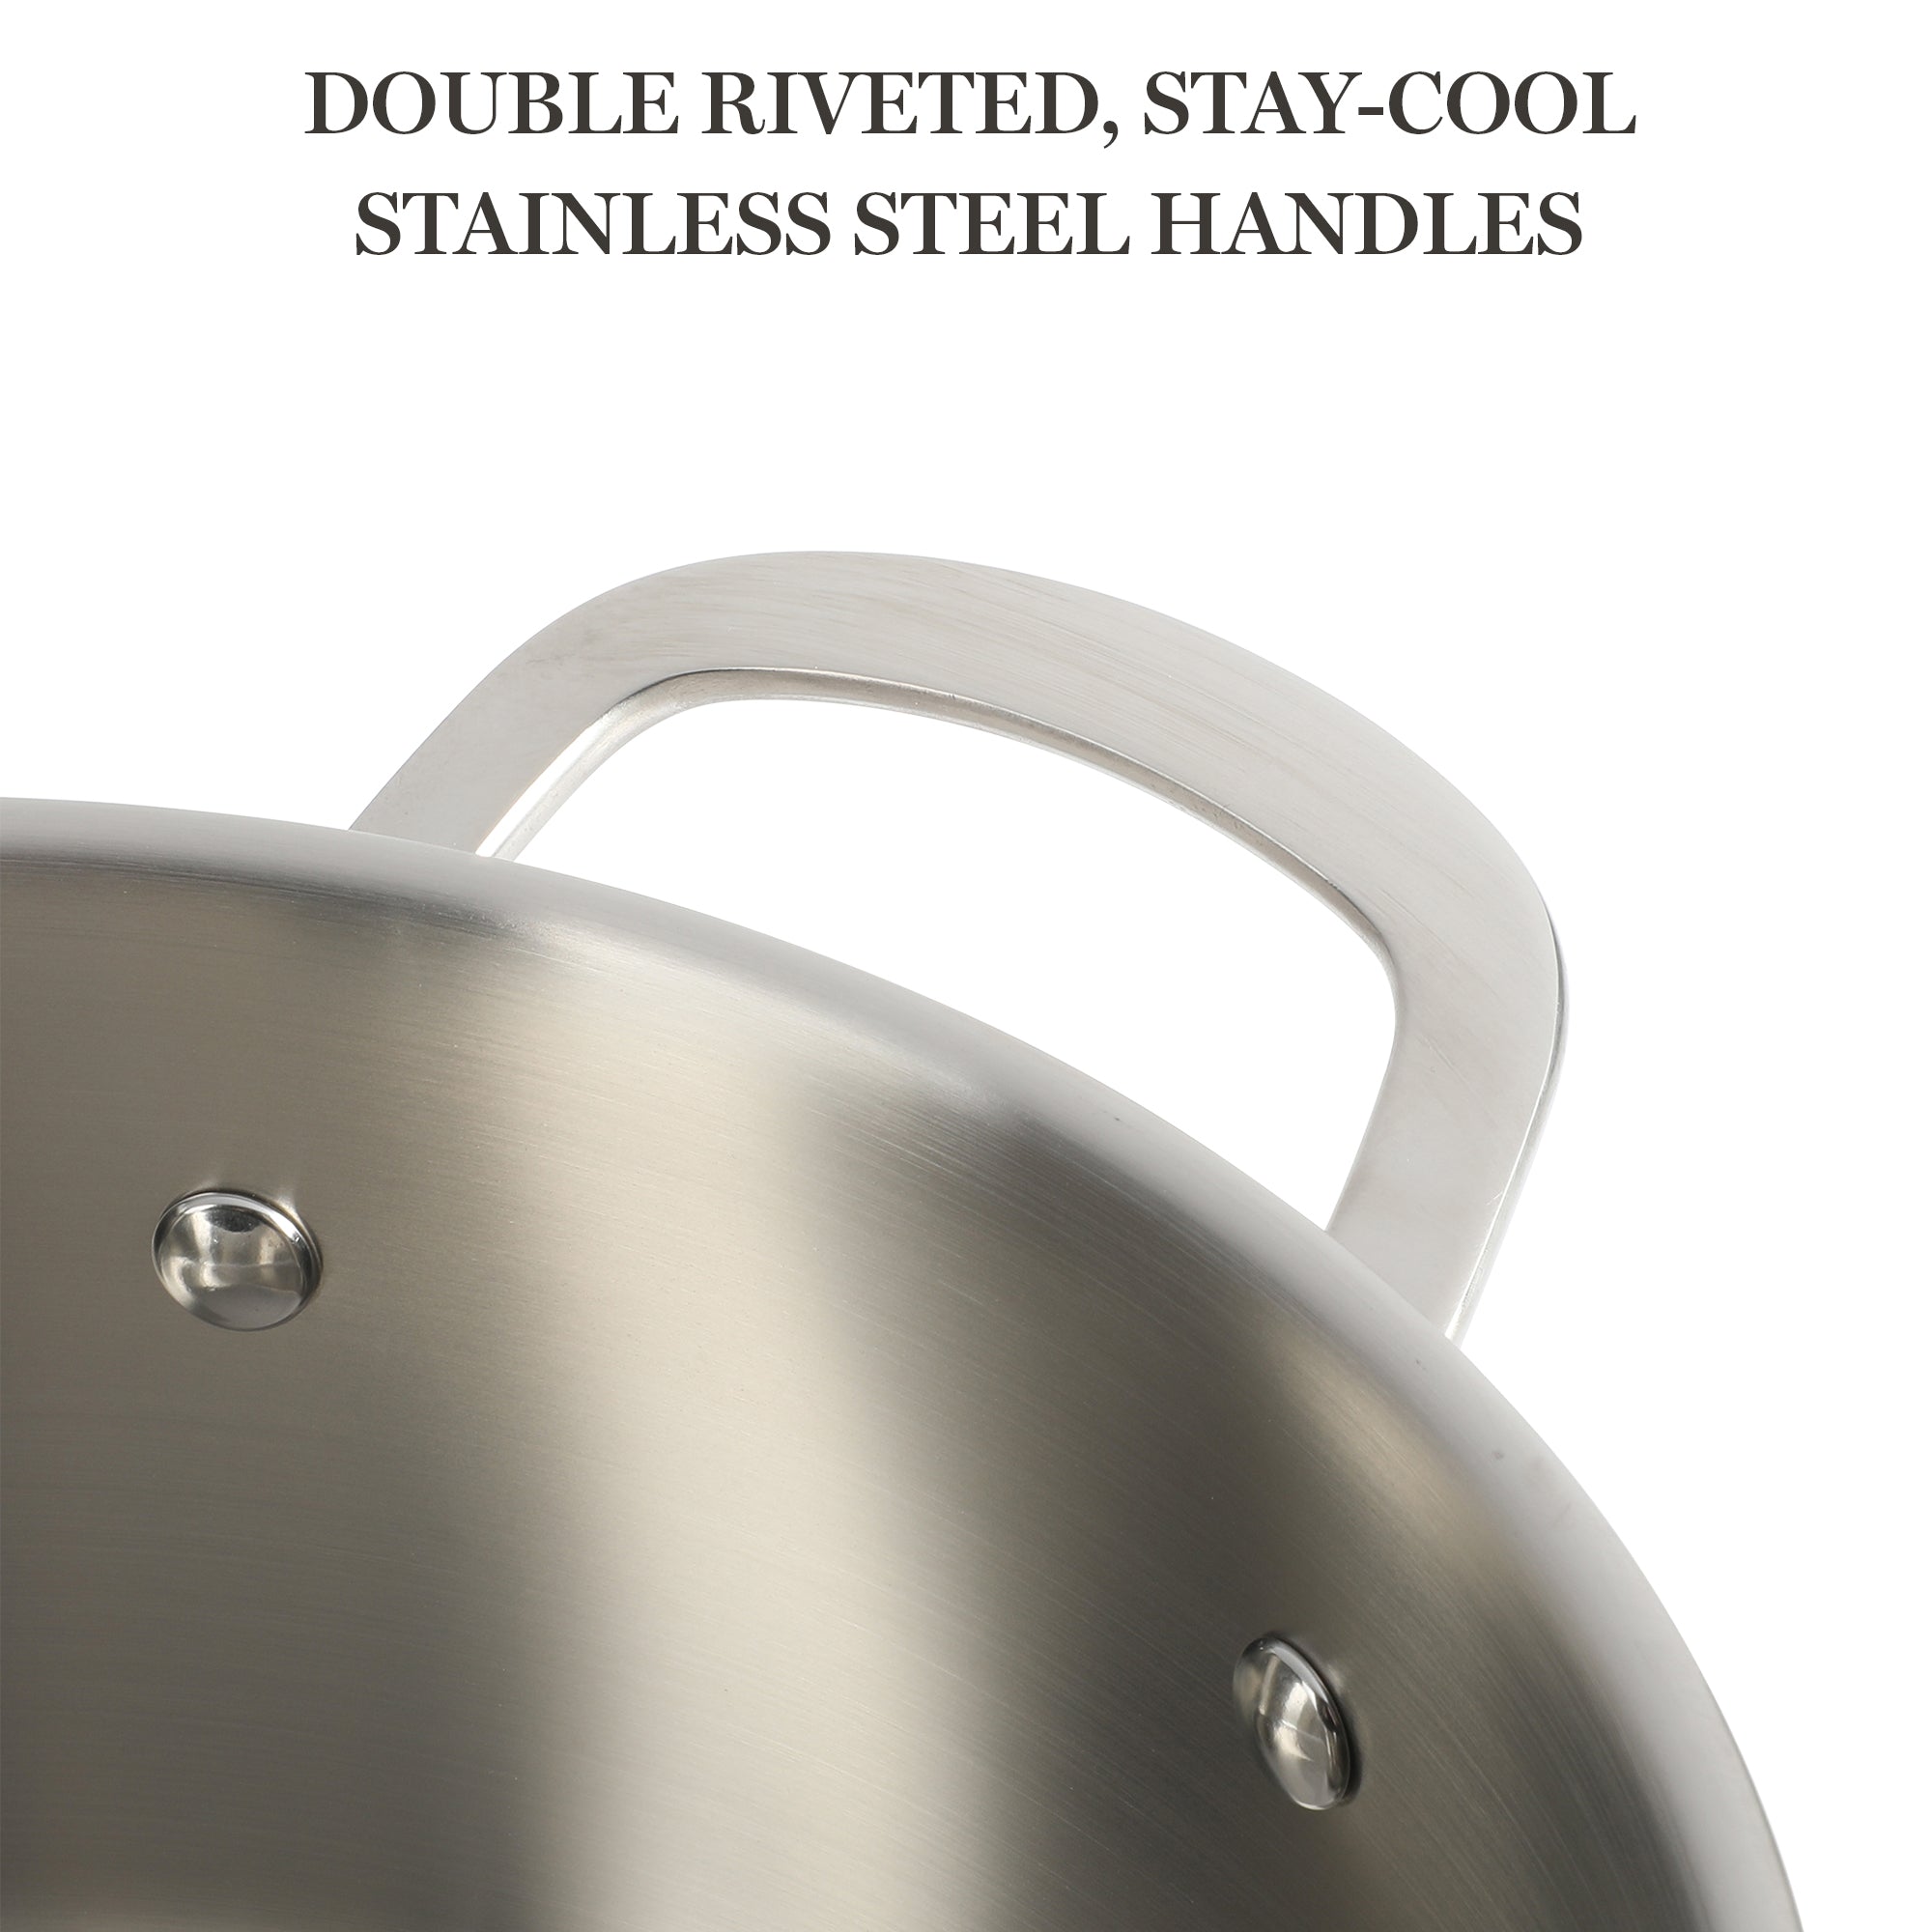 Stainless Steel Dutch Oven, 5-Quart, Matte Black,Free Shipping